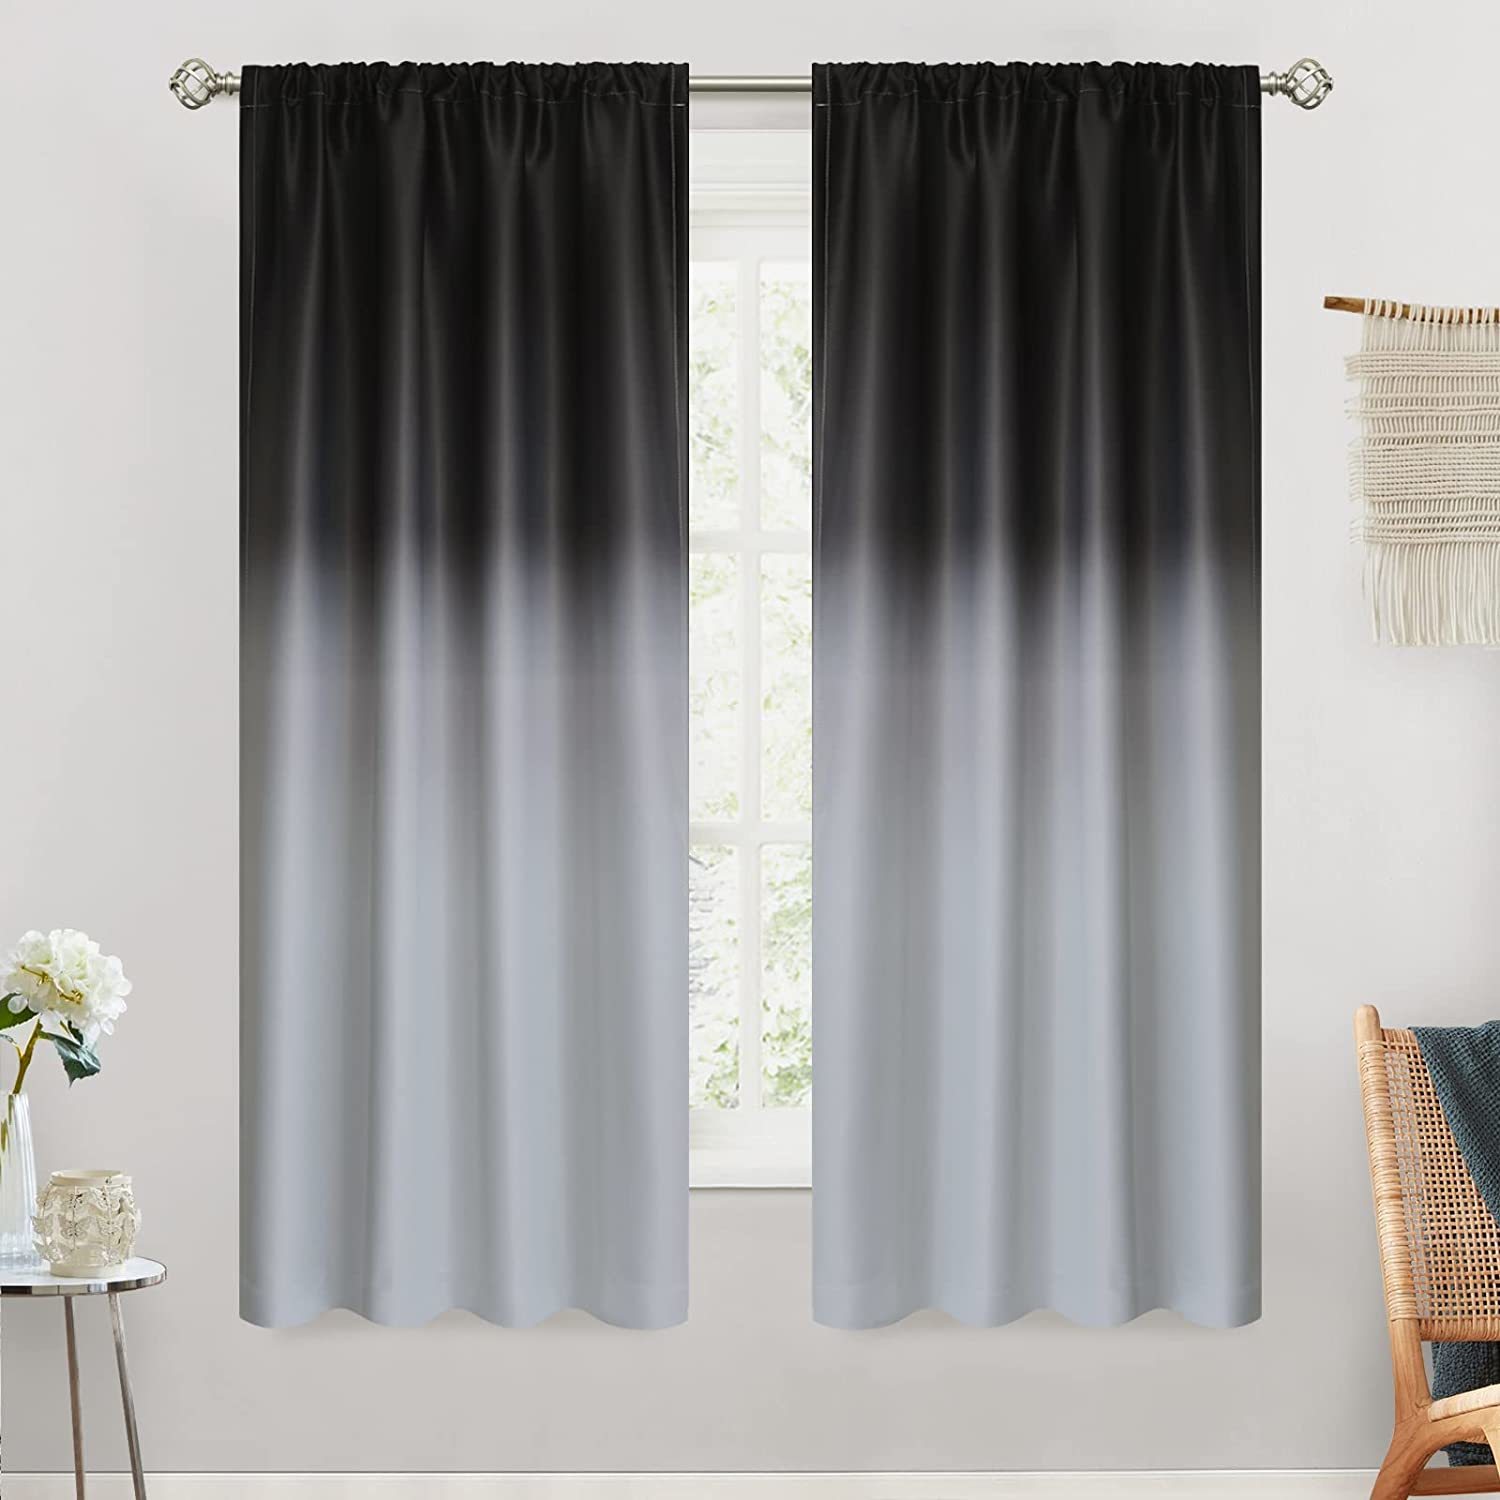 Primary image for Simplehome Rod Pocket Ombre Room Darkening Curtains For Living Room, Light